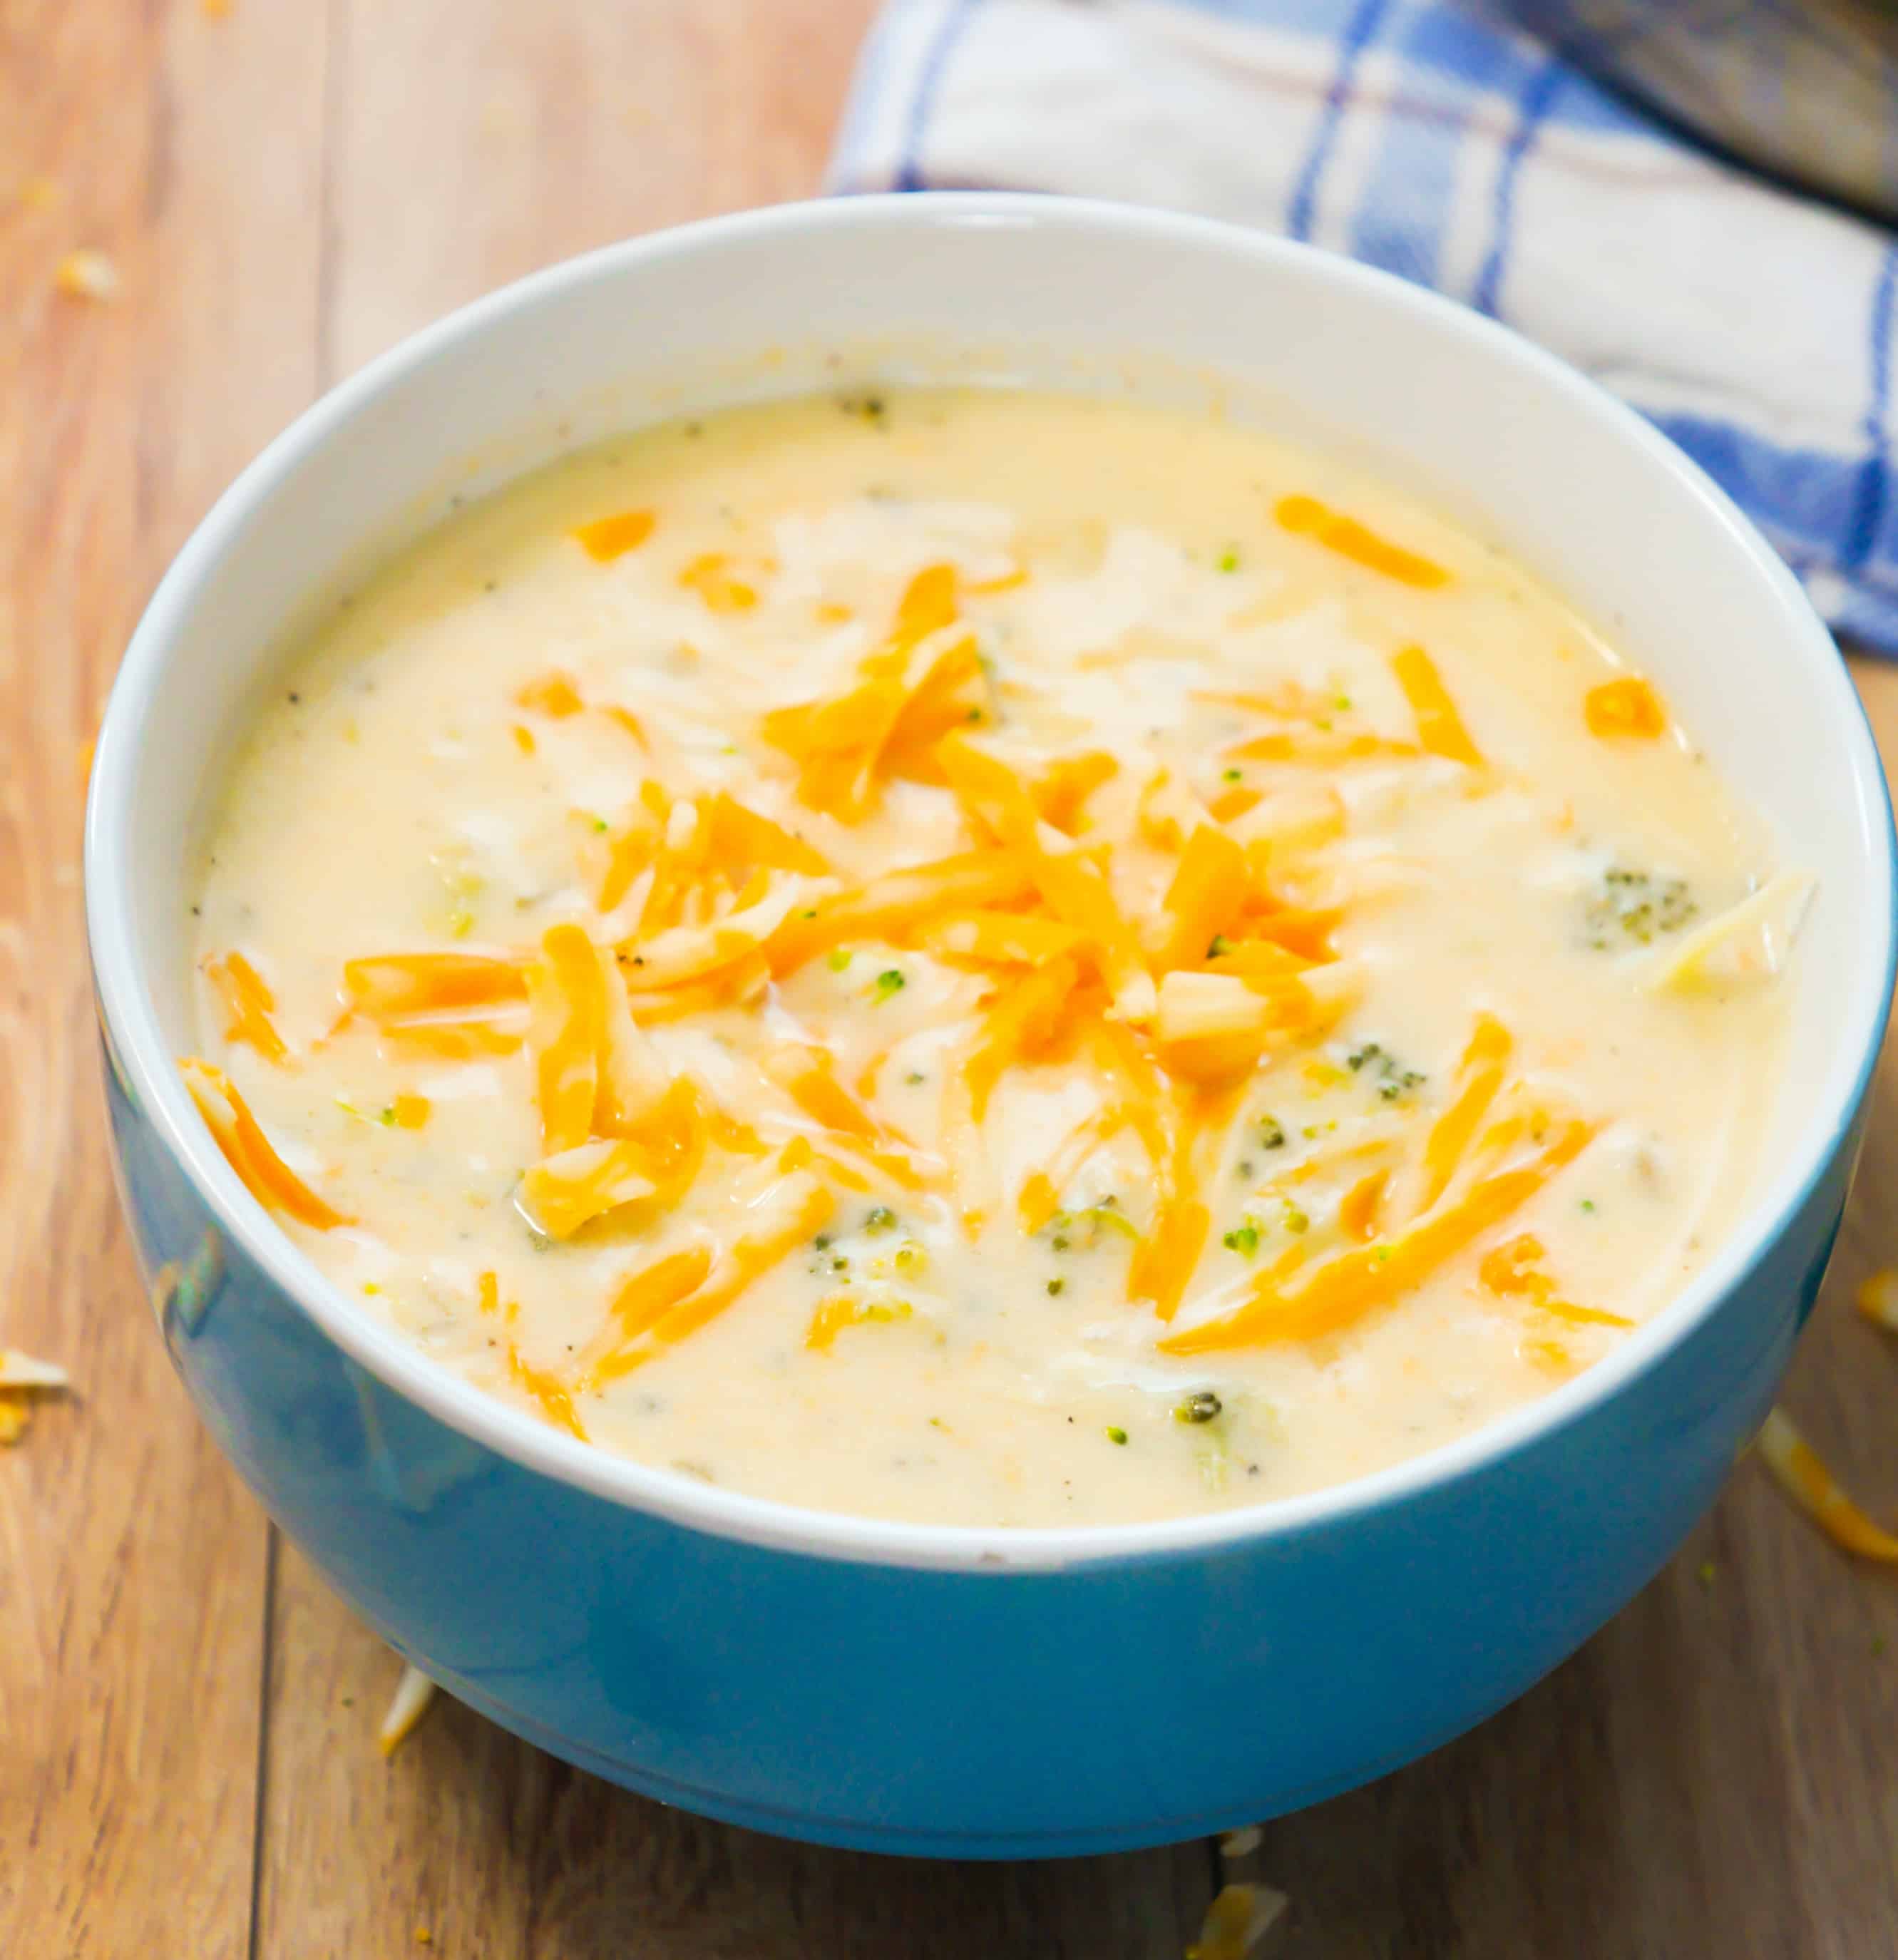 Broccoli cheese soup with chicken. Great fall recipe.